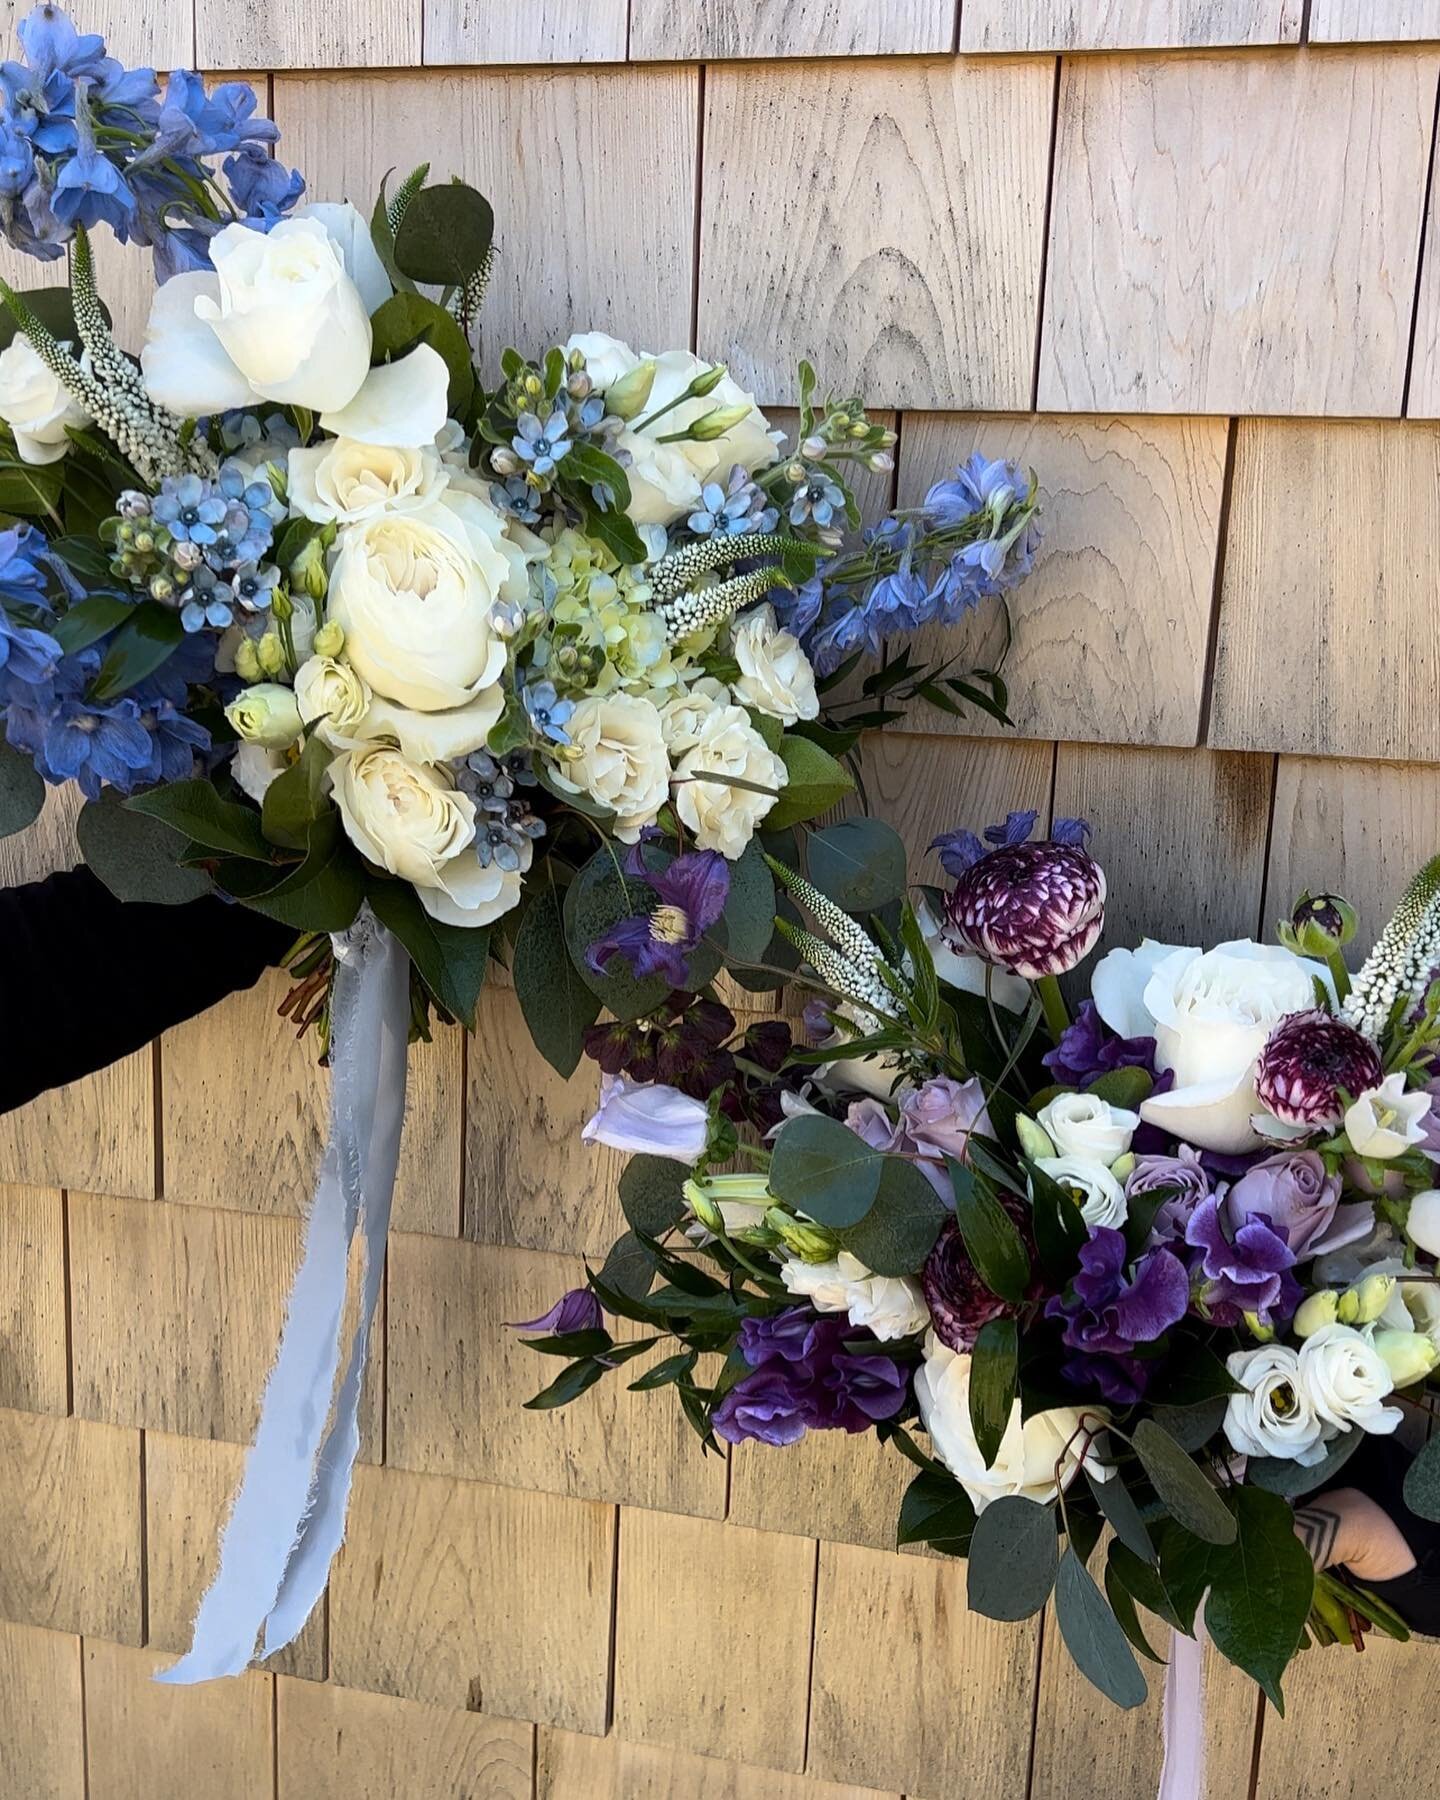 Never got to post my double wedding weekend cause I got sucked into Mother&rsquo;s Day. These bridal bouquets from Friday &amp; Saturday&rsquo;s wedding compliment each other so well
&bull;
&bull;
&bull;
&bull;
&bull; #bostonwedding @botanicalbrouhah